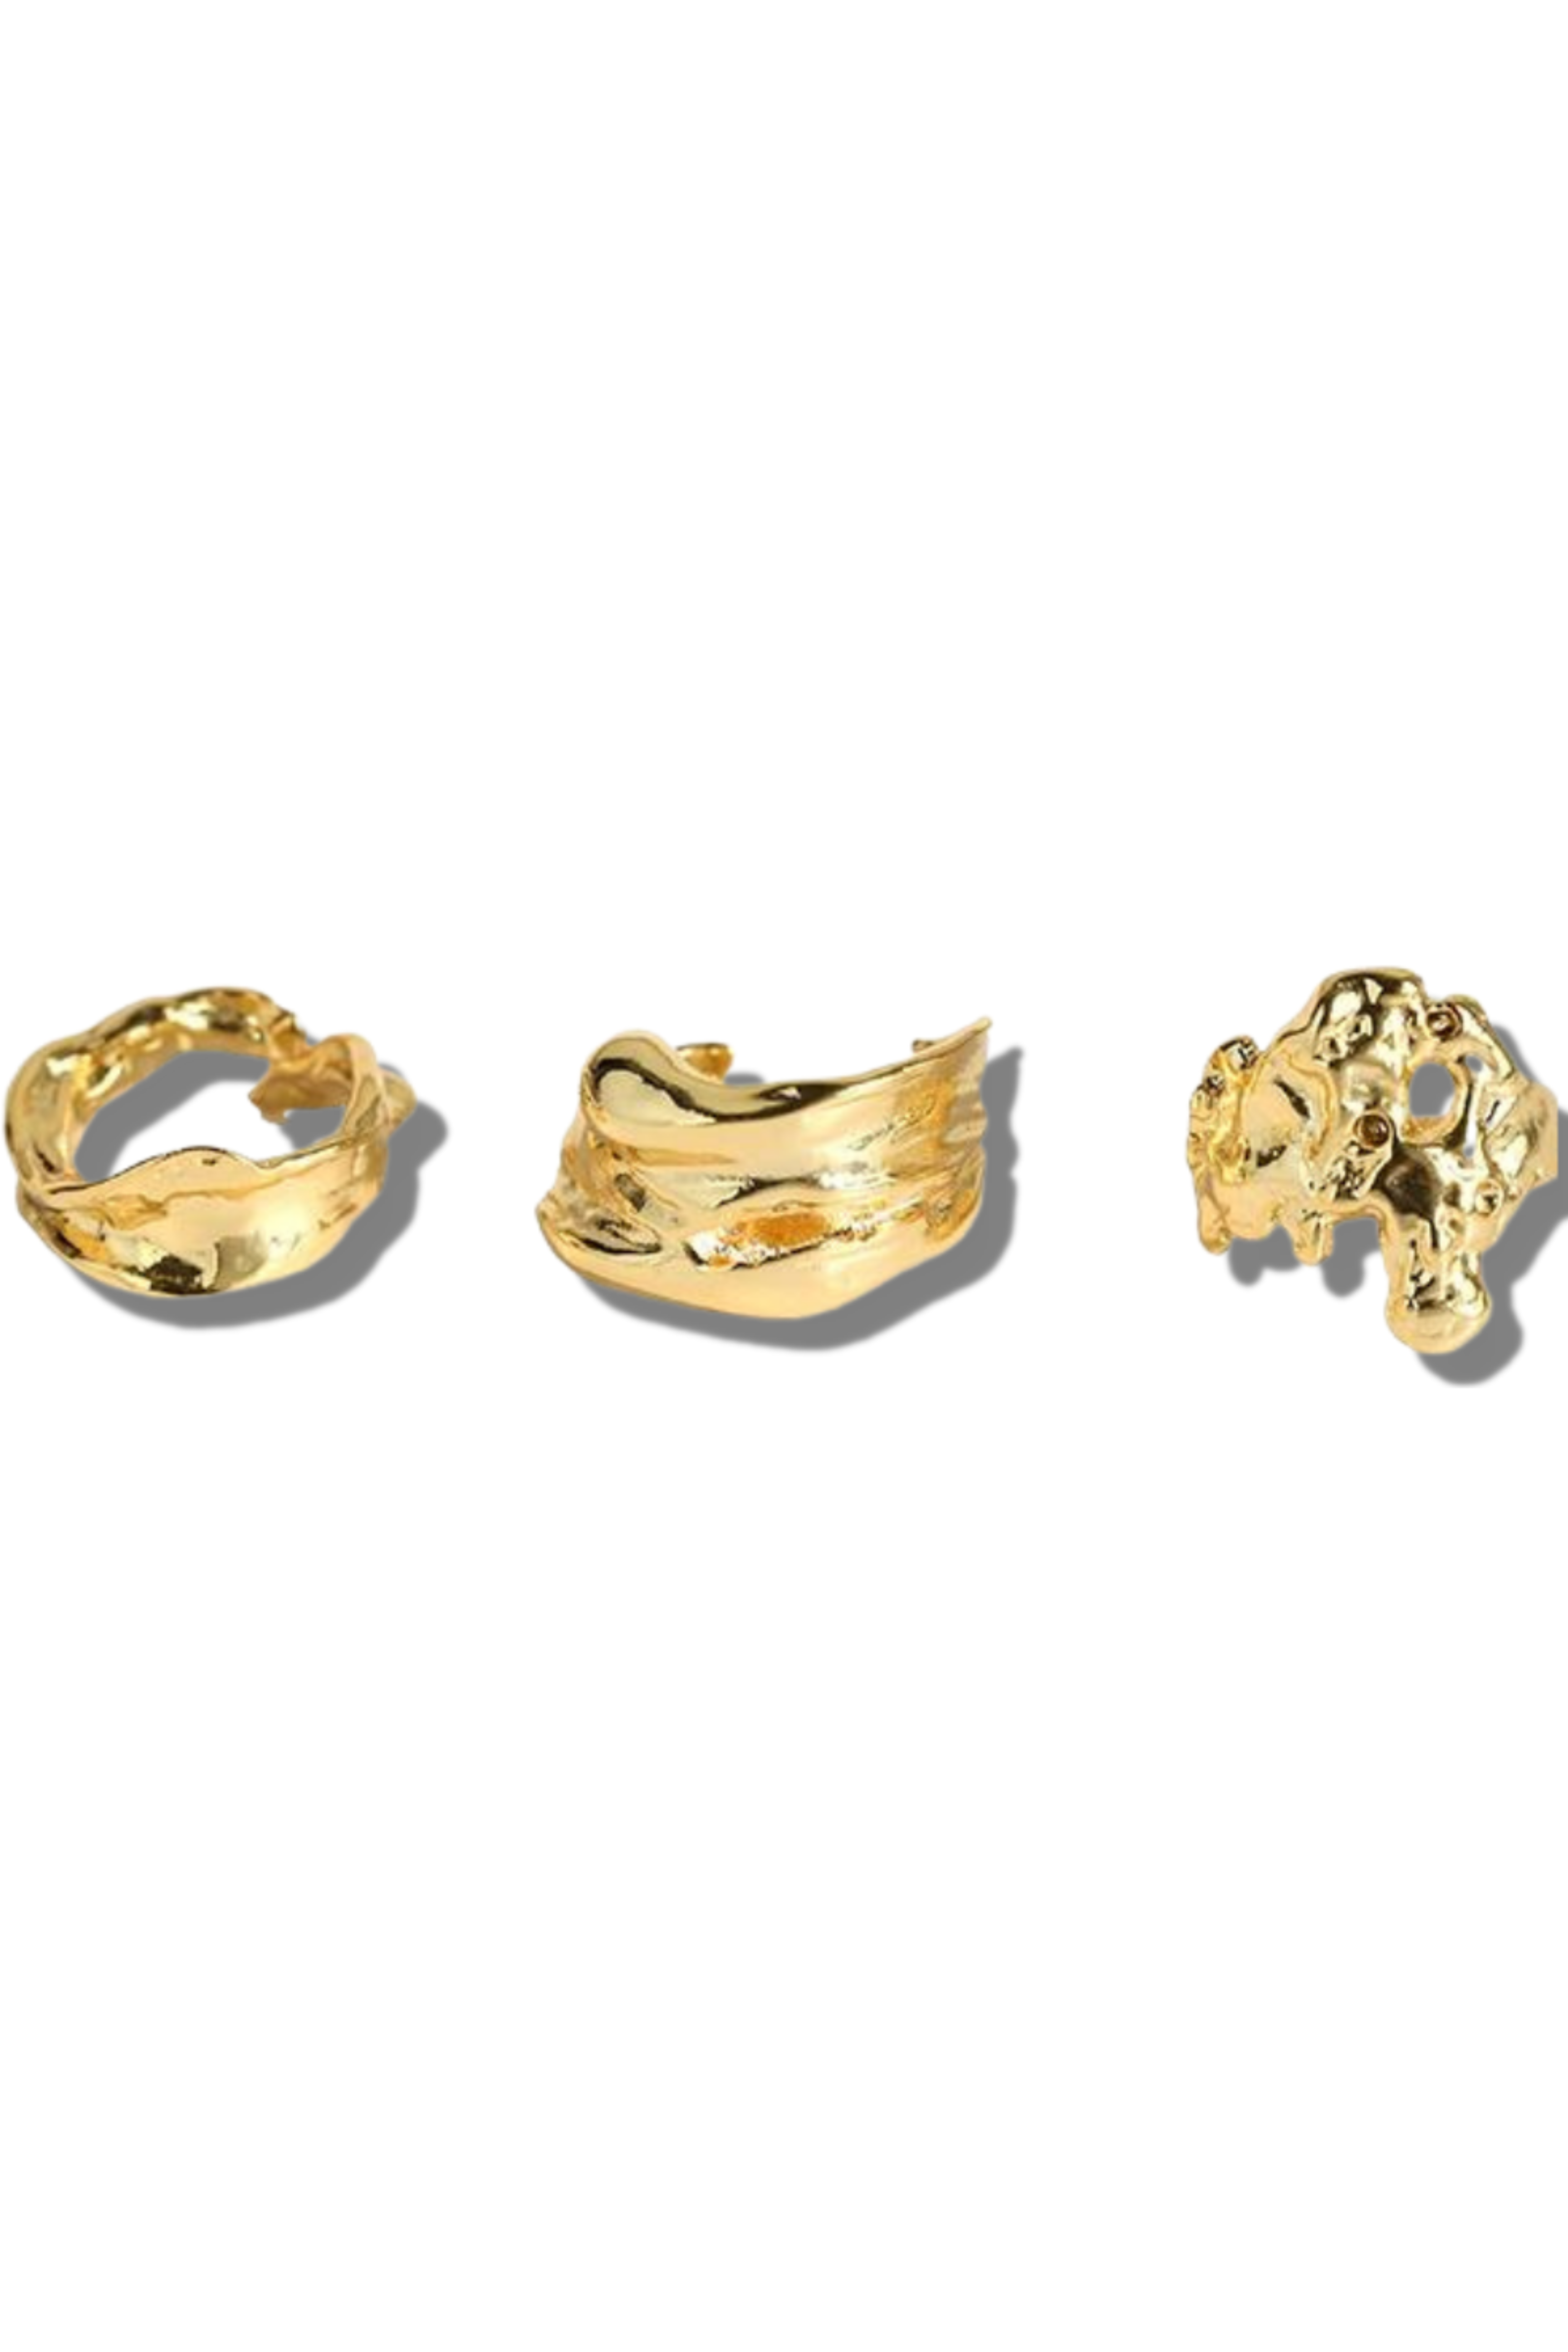 Three 18k gold molten rings placed side-by-side. Ella Lava Ring Trio (Set of 3) by E's Element.